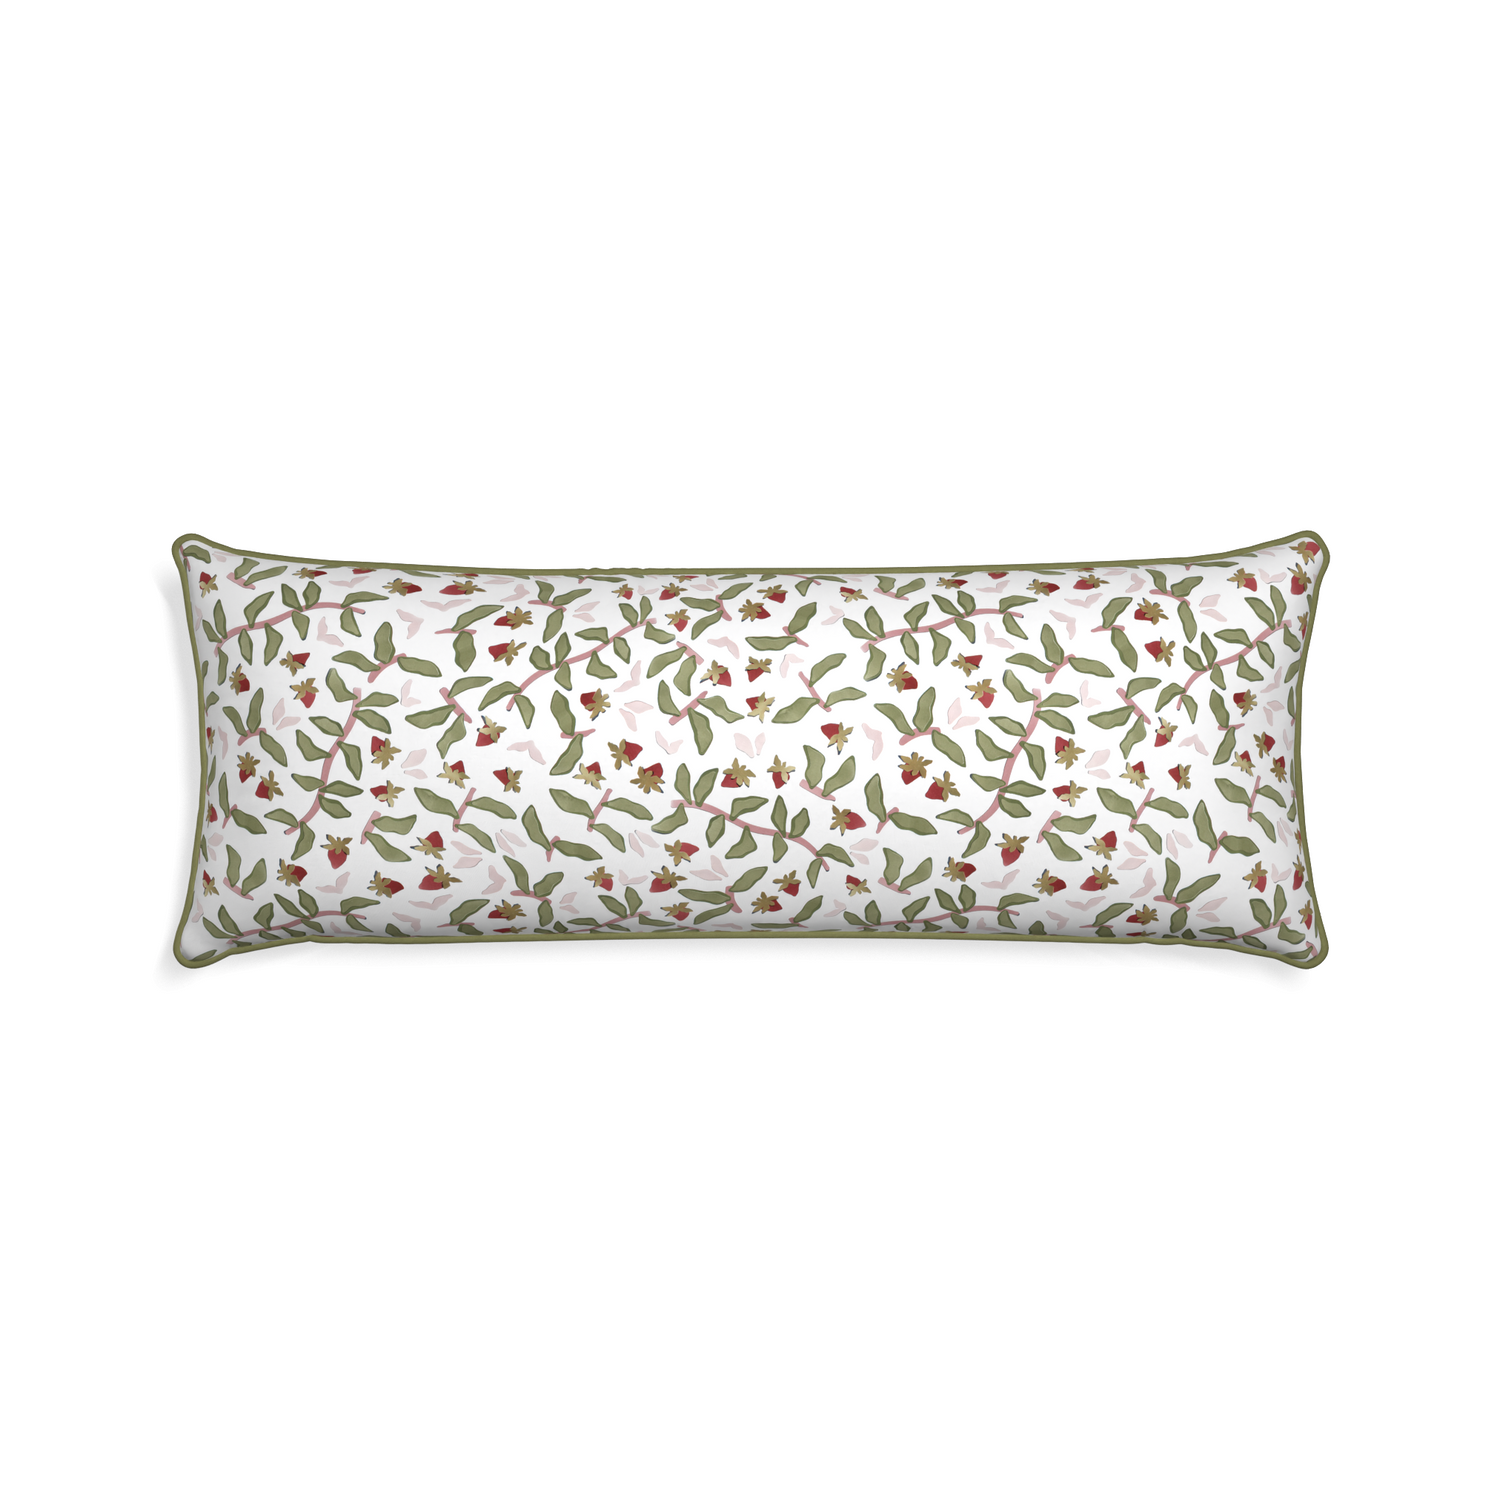 Xl-lumbar nellie custom pillow with moss piping on white background